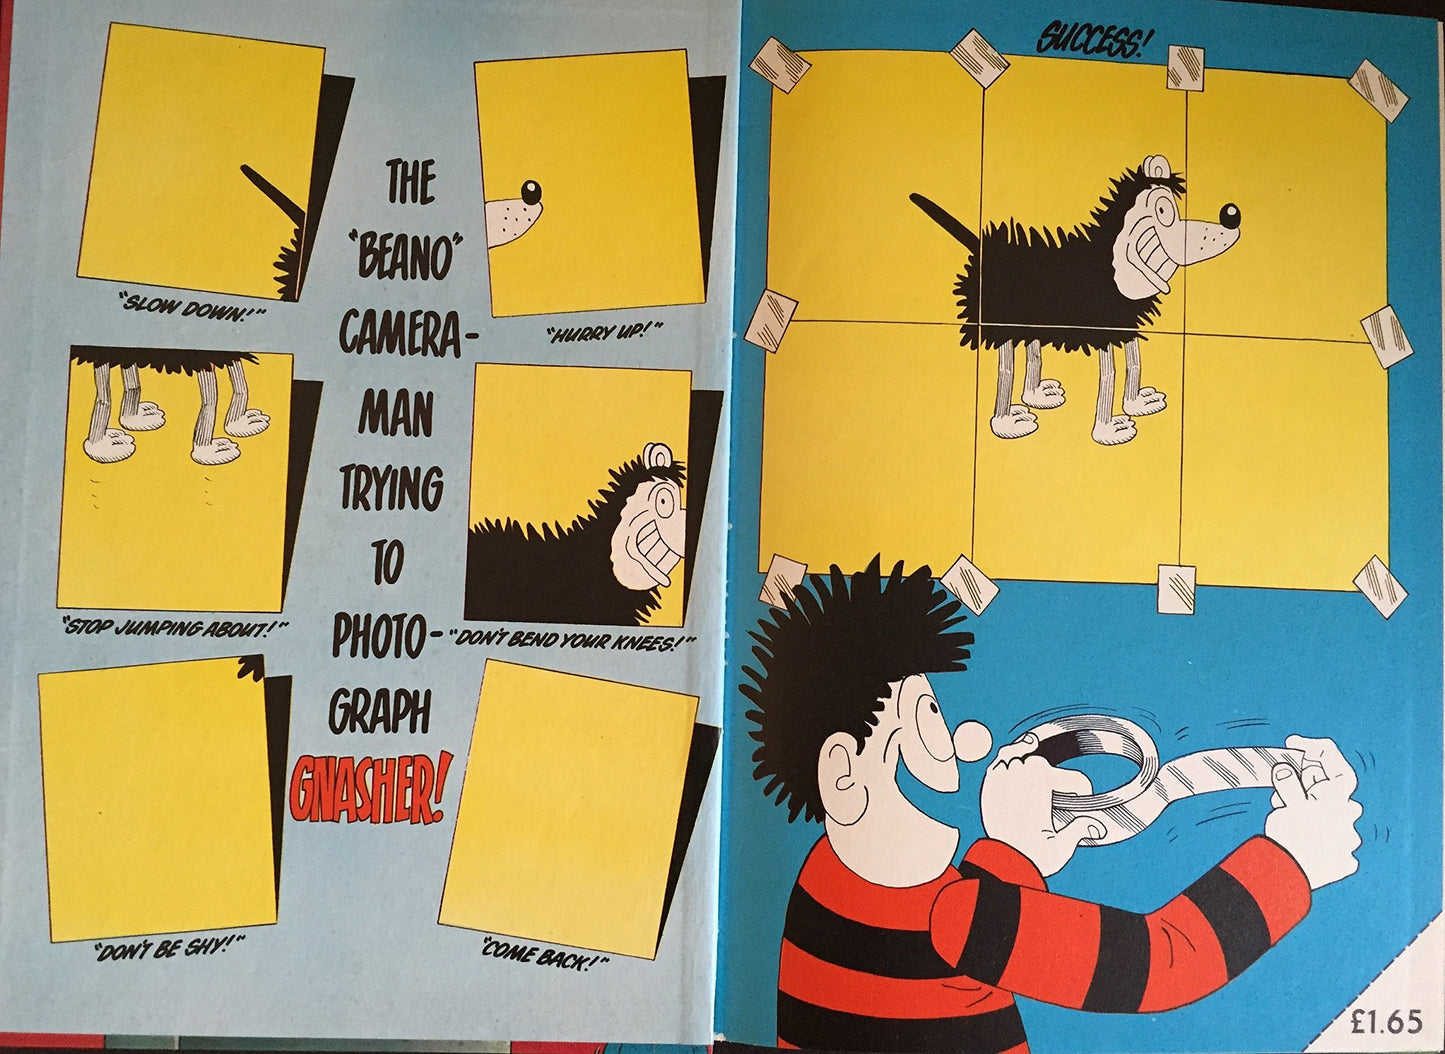 Dennis the Menace 1983 Annual (from the Beano) [Hardcover] [Sep 01, 1982] D C Thomson …